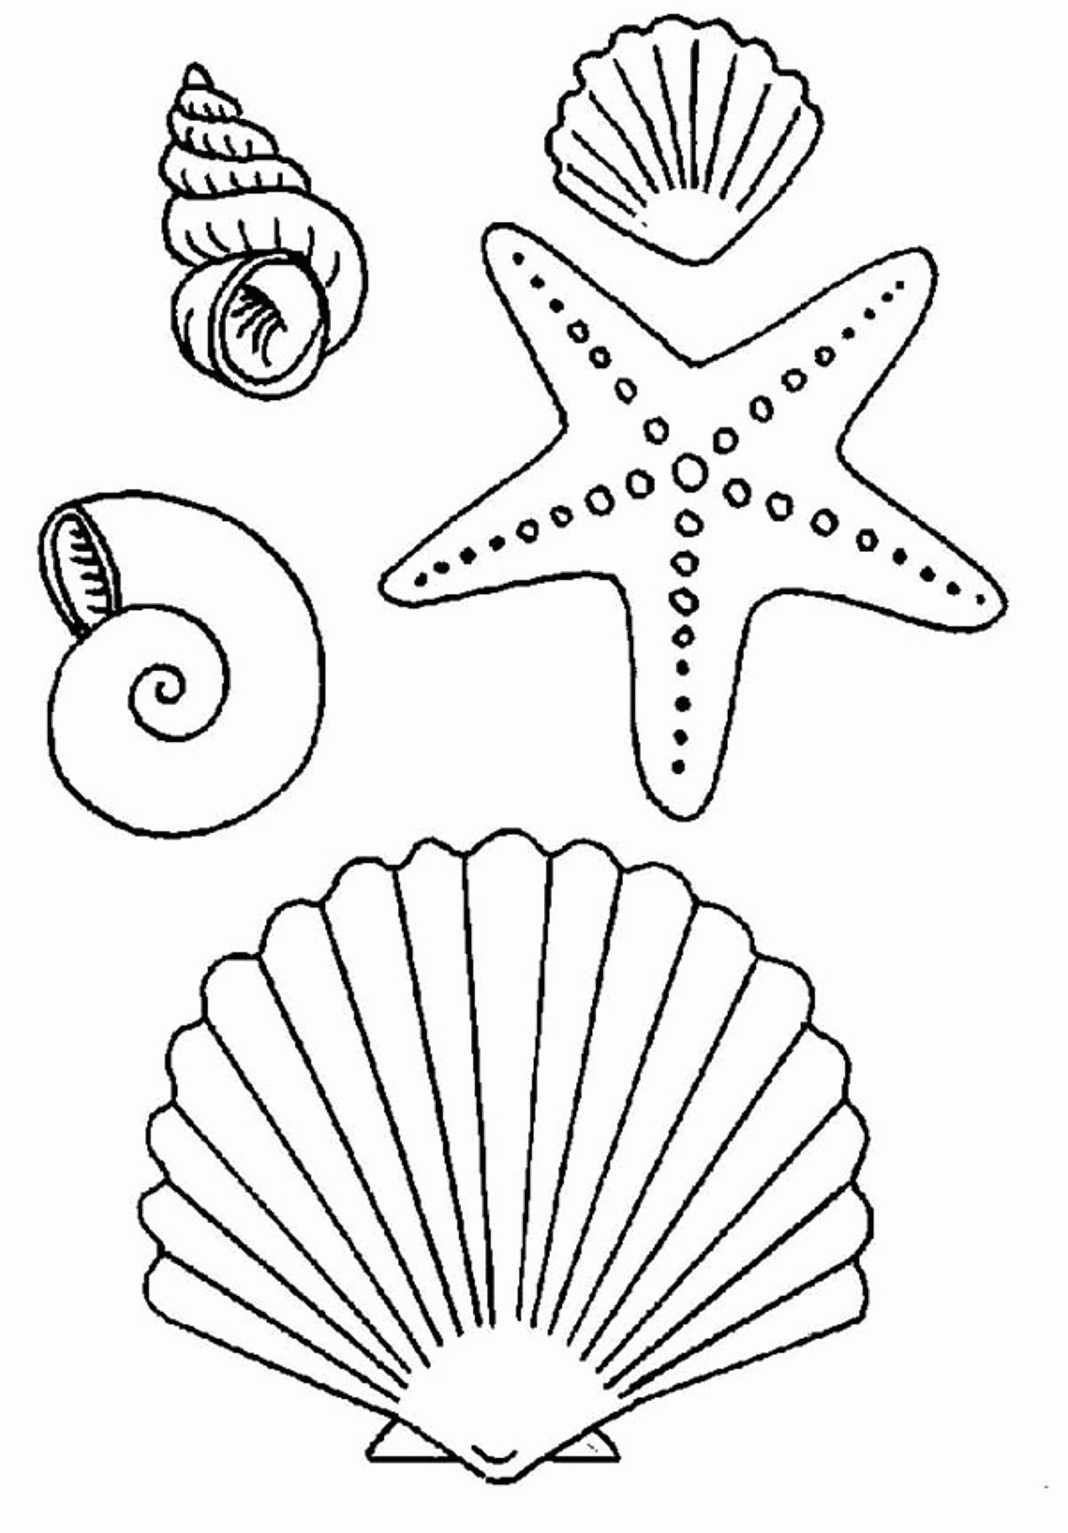 Top Free Coloring Pages Of Shells - Widetheme